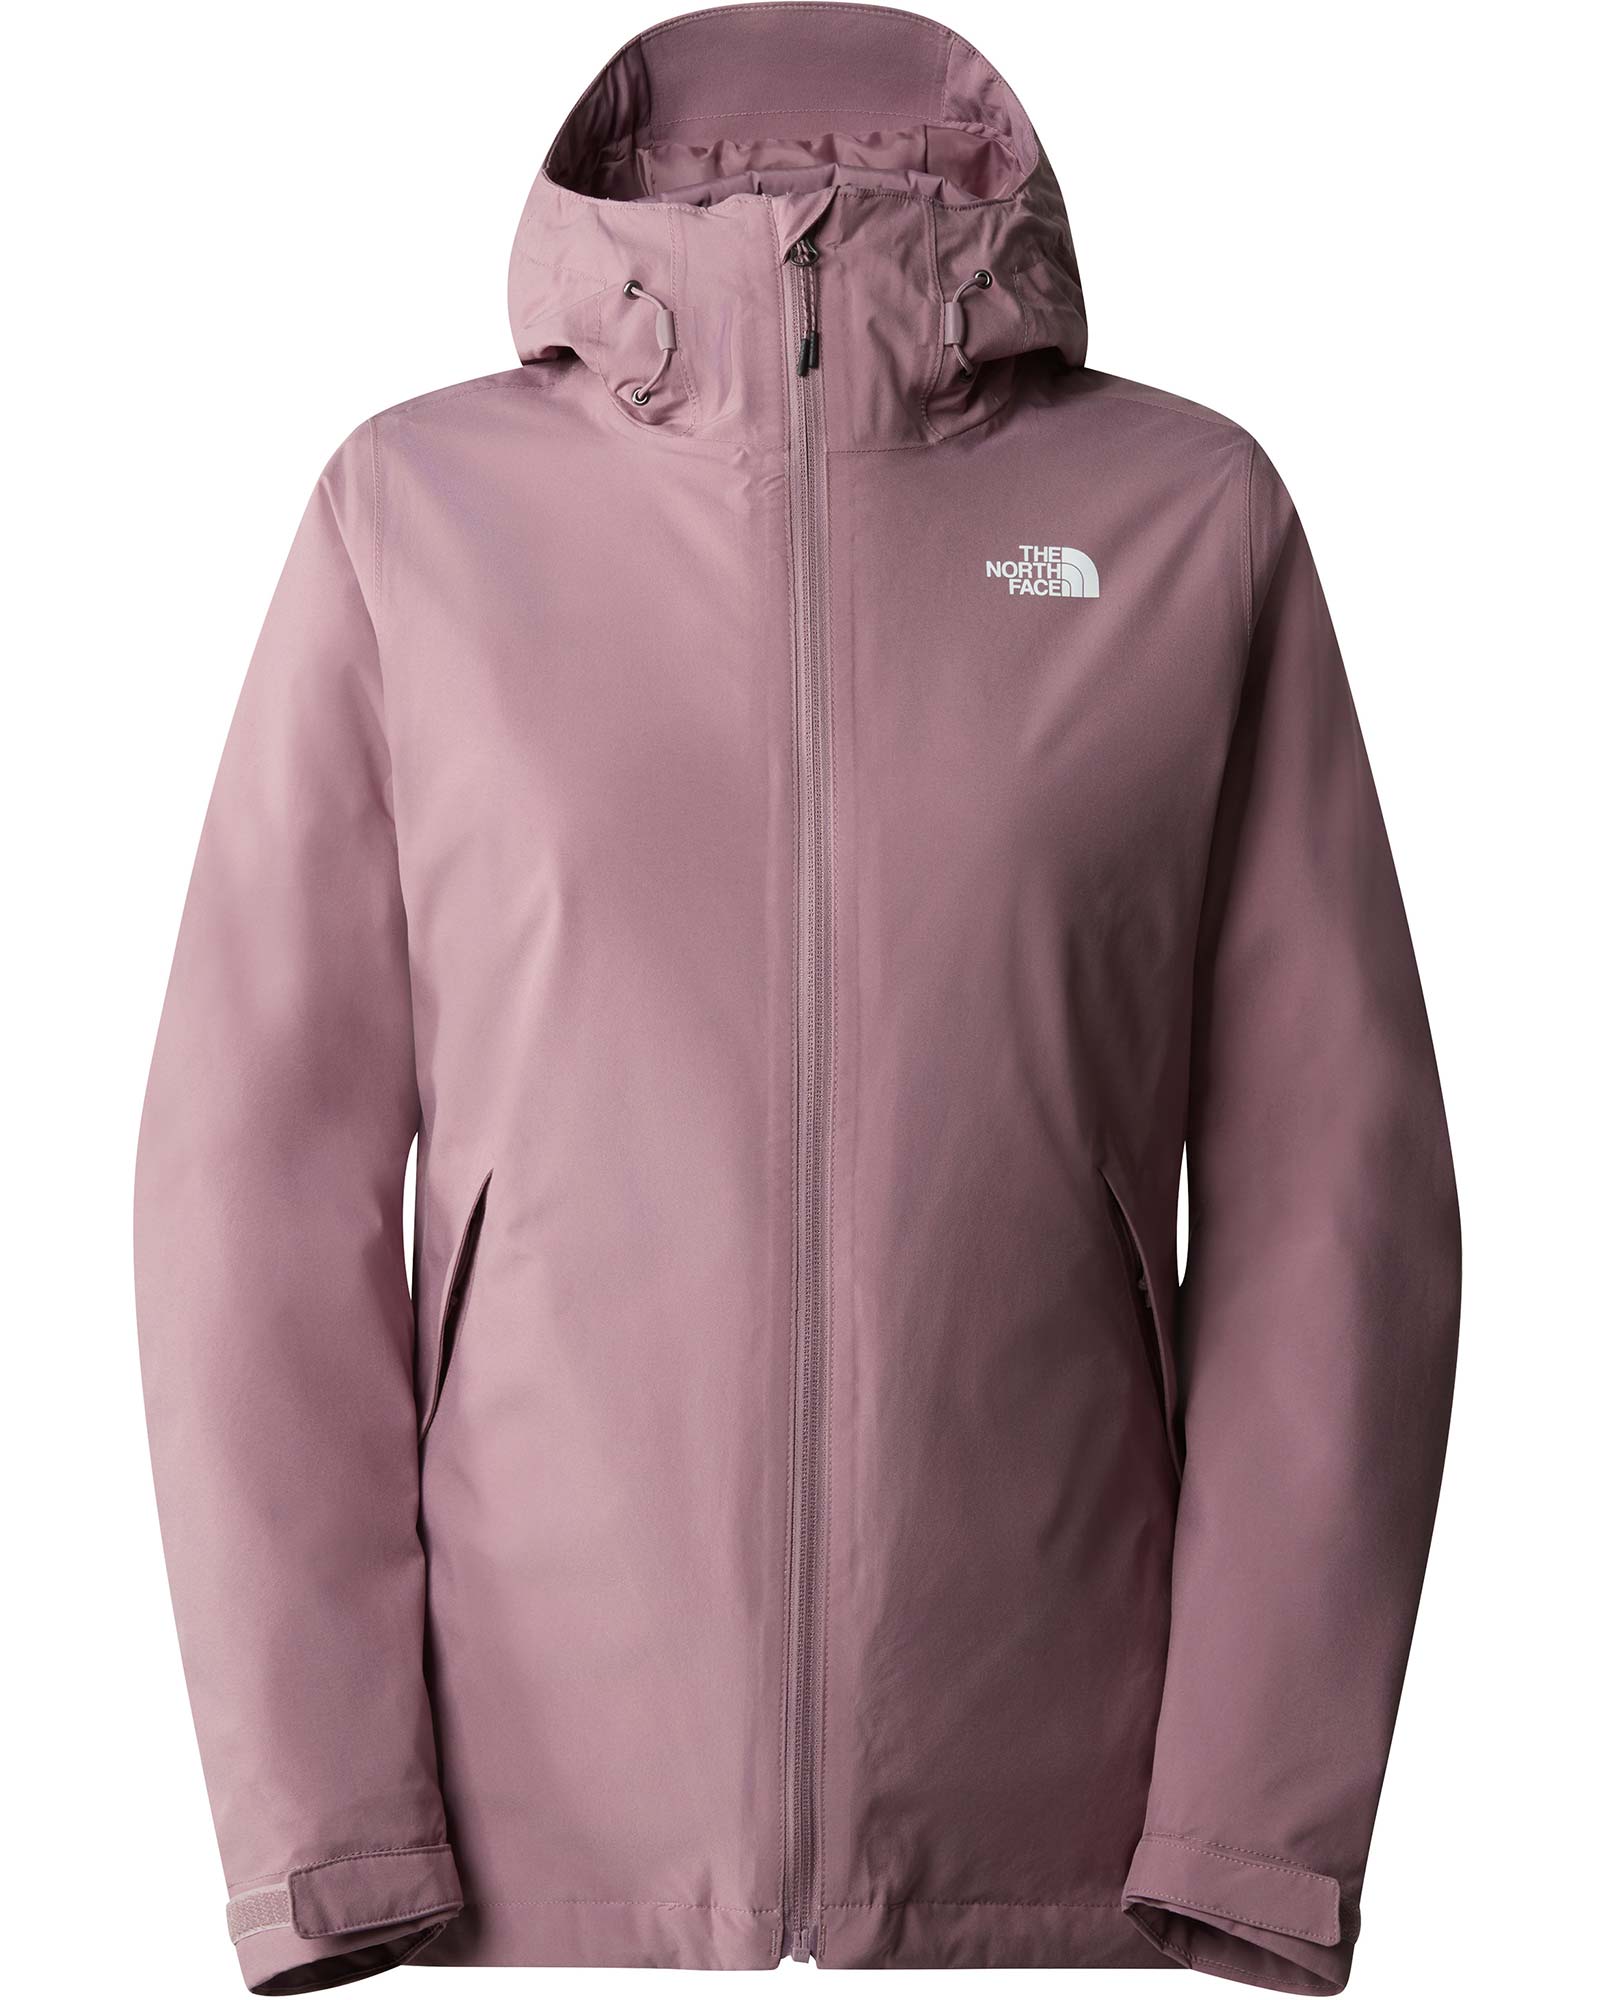 The North Face Carto Women’s Triclimate Jacket - Fawn Grey S